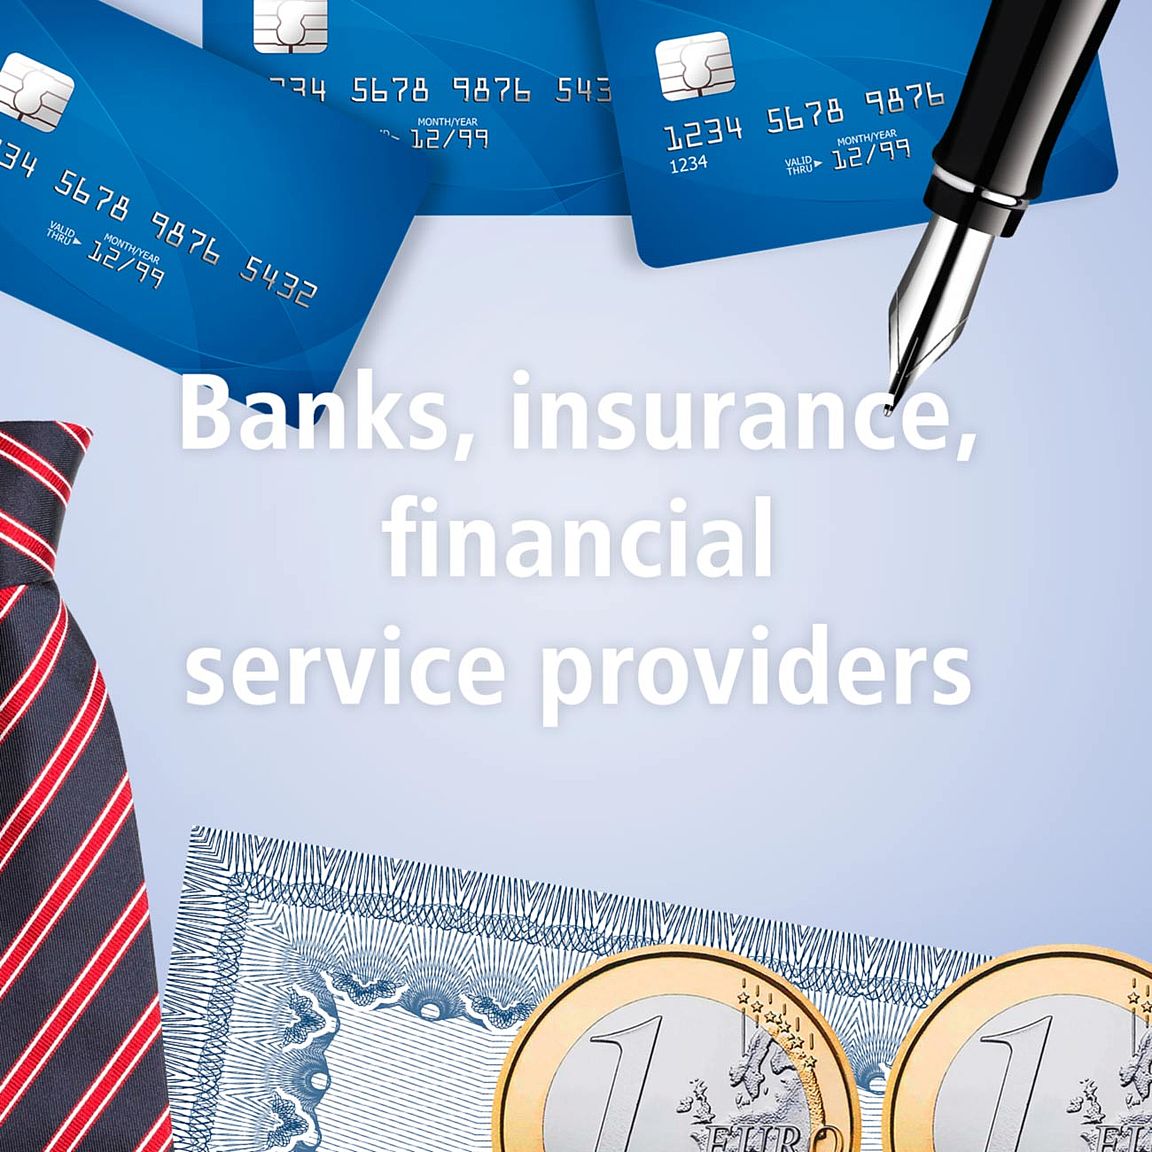 Banks, insurance, financial service providers